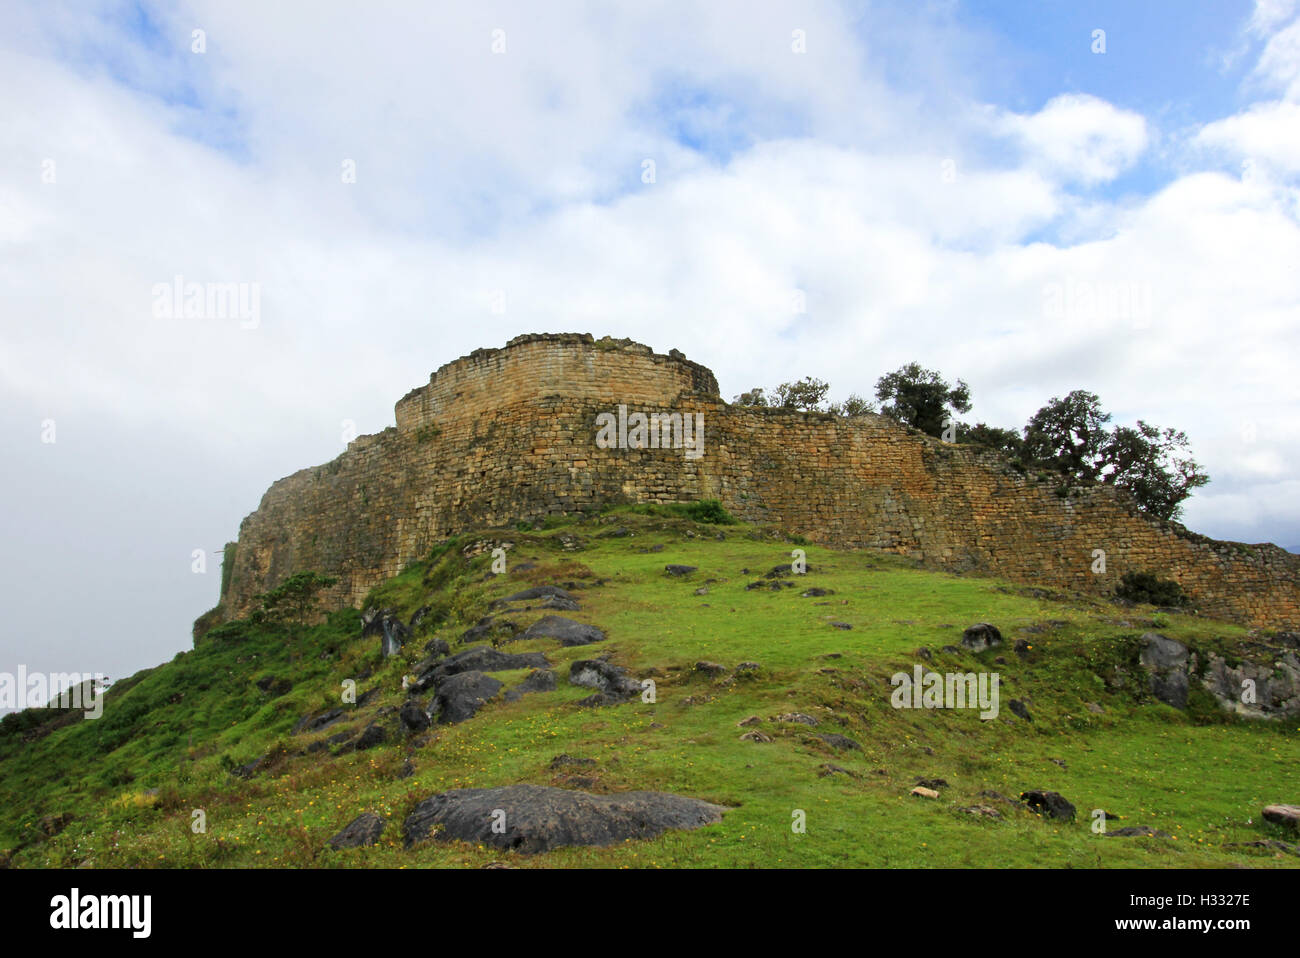 Pre inca ruin Kuelap high up in the north peruvian mountains near Chachapoyas. It was built to be a fortress. Stock Photo